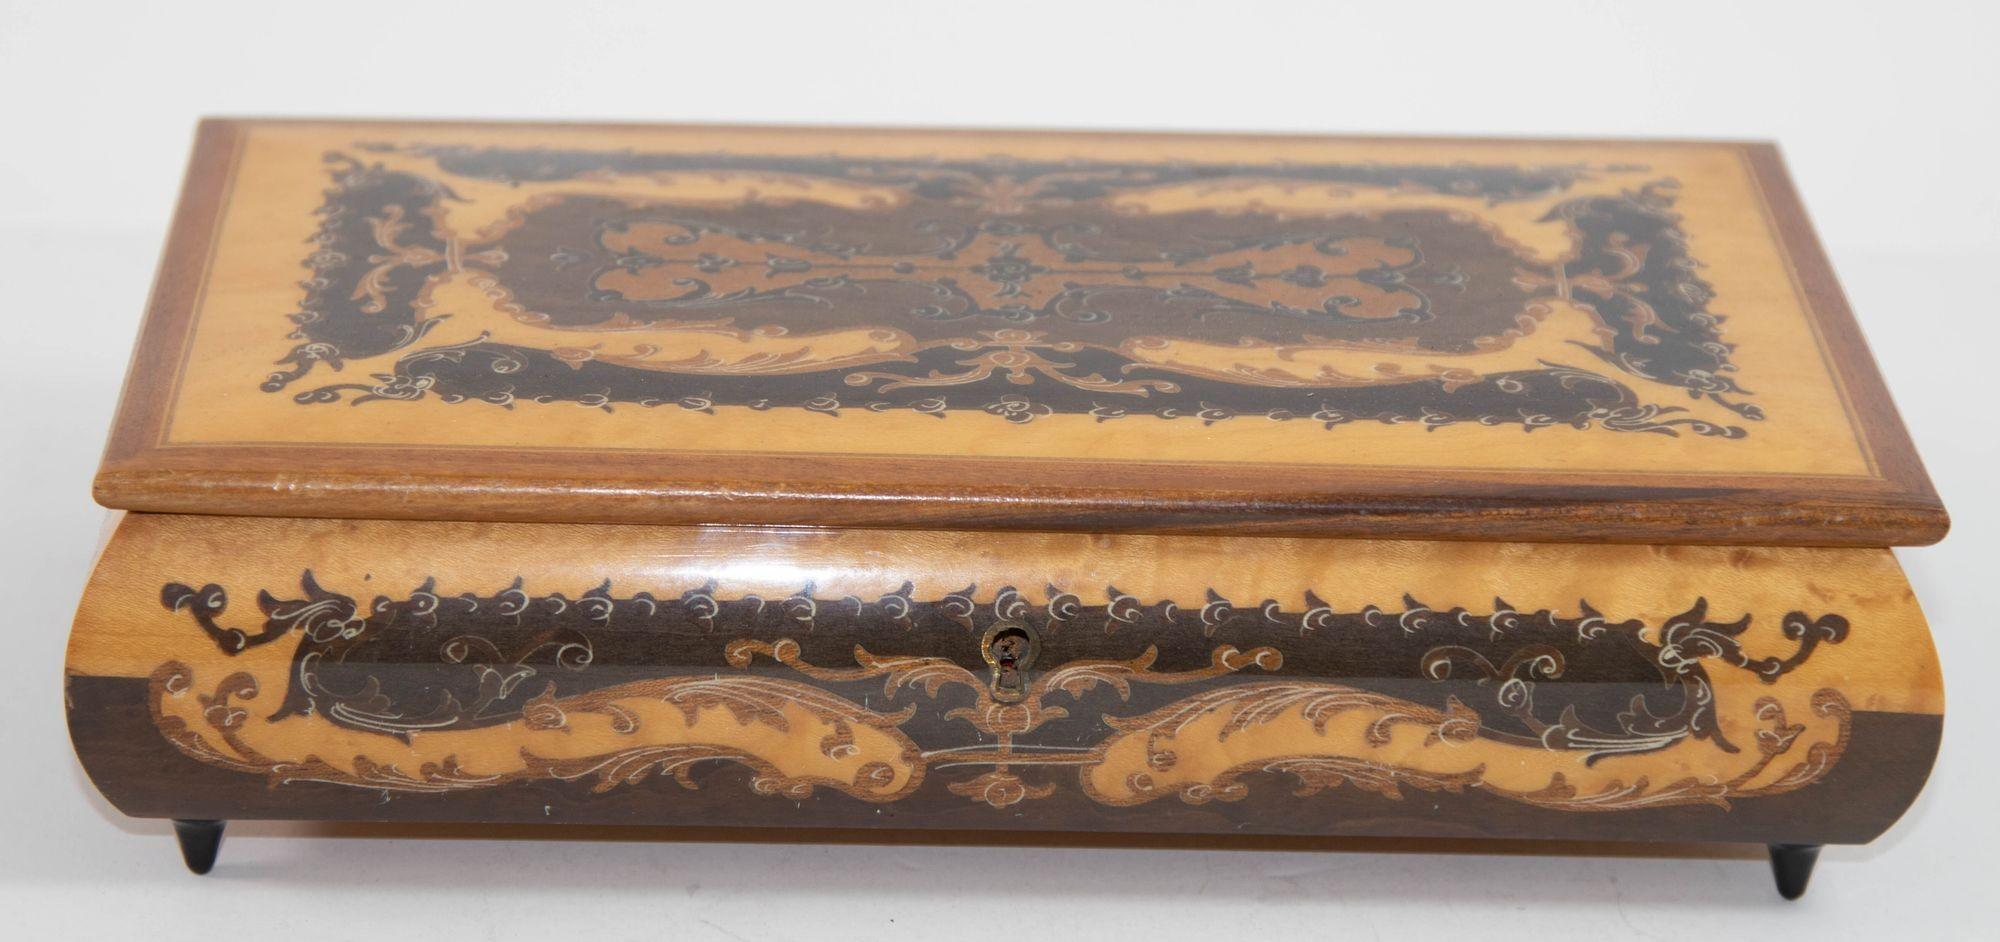 Elegant vintage large footed Brown color wooden music box with top finely hand painted and inlaid with foliages floral decor.
Upon opening, the music box begins to play 